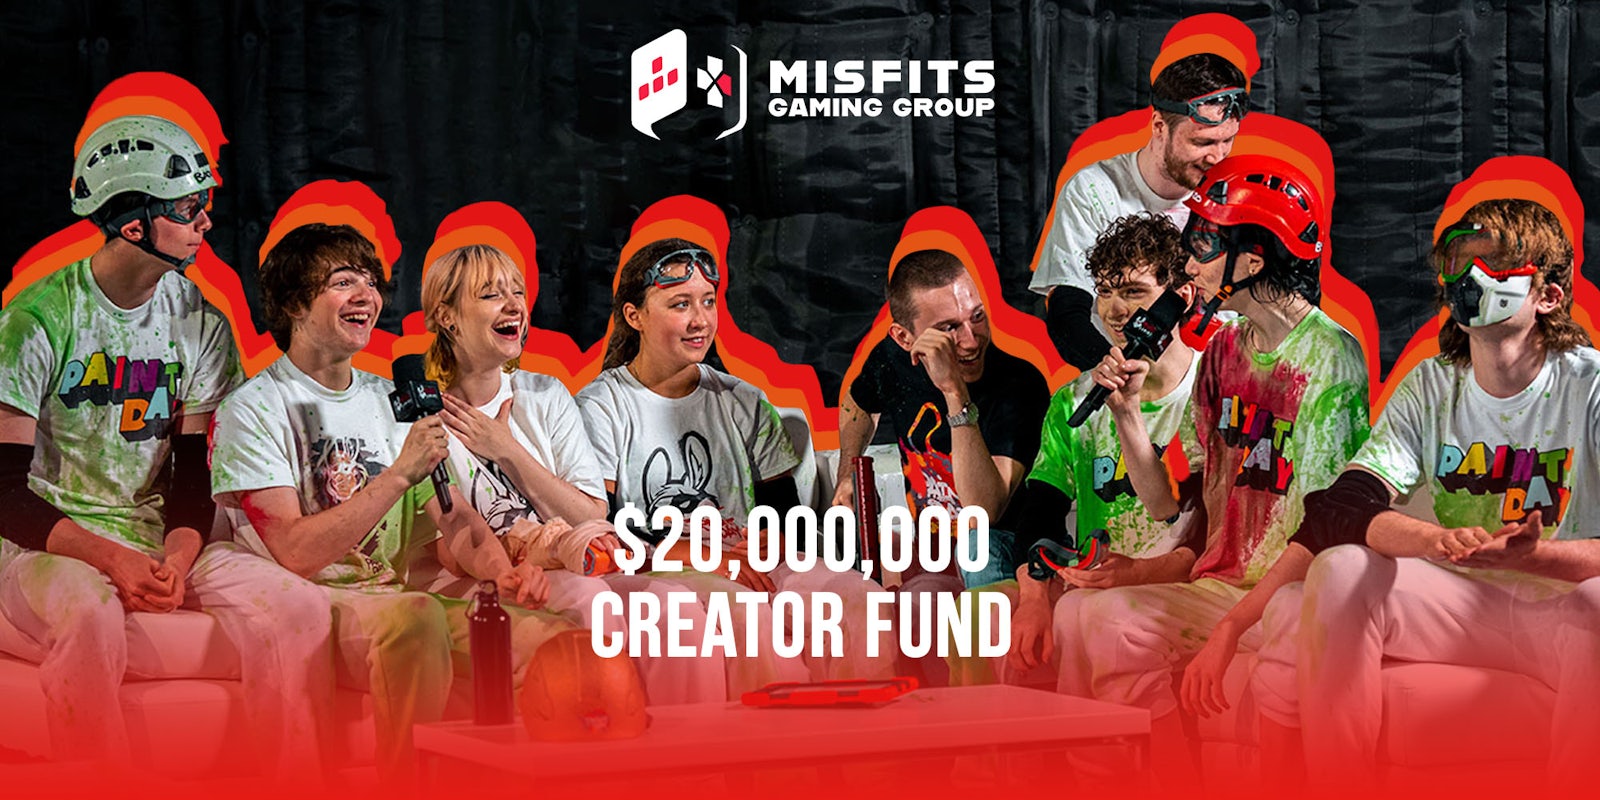 Misfits gaming group speaking on couch with red gradient bottom to top with captions 'MISFITS GAMING GROUP' '$20,000,000 CREATOR FUND' Passionfruit Remix